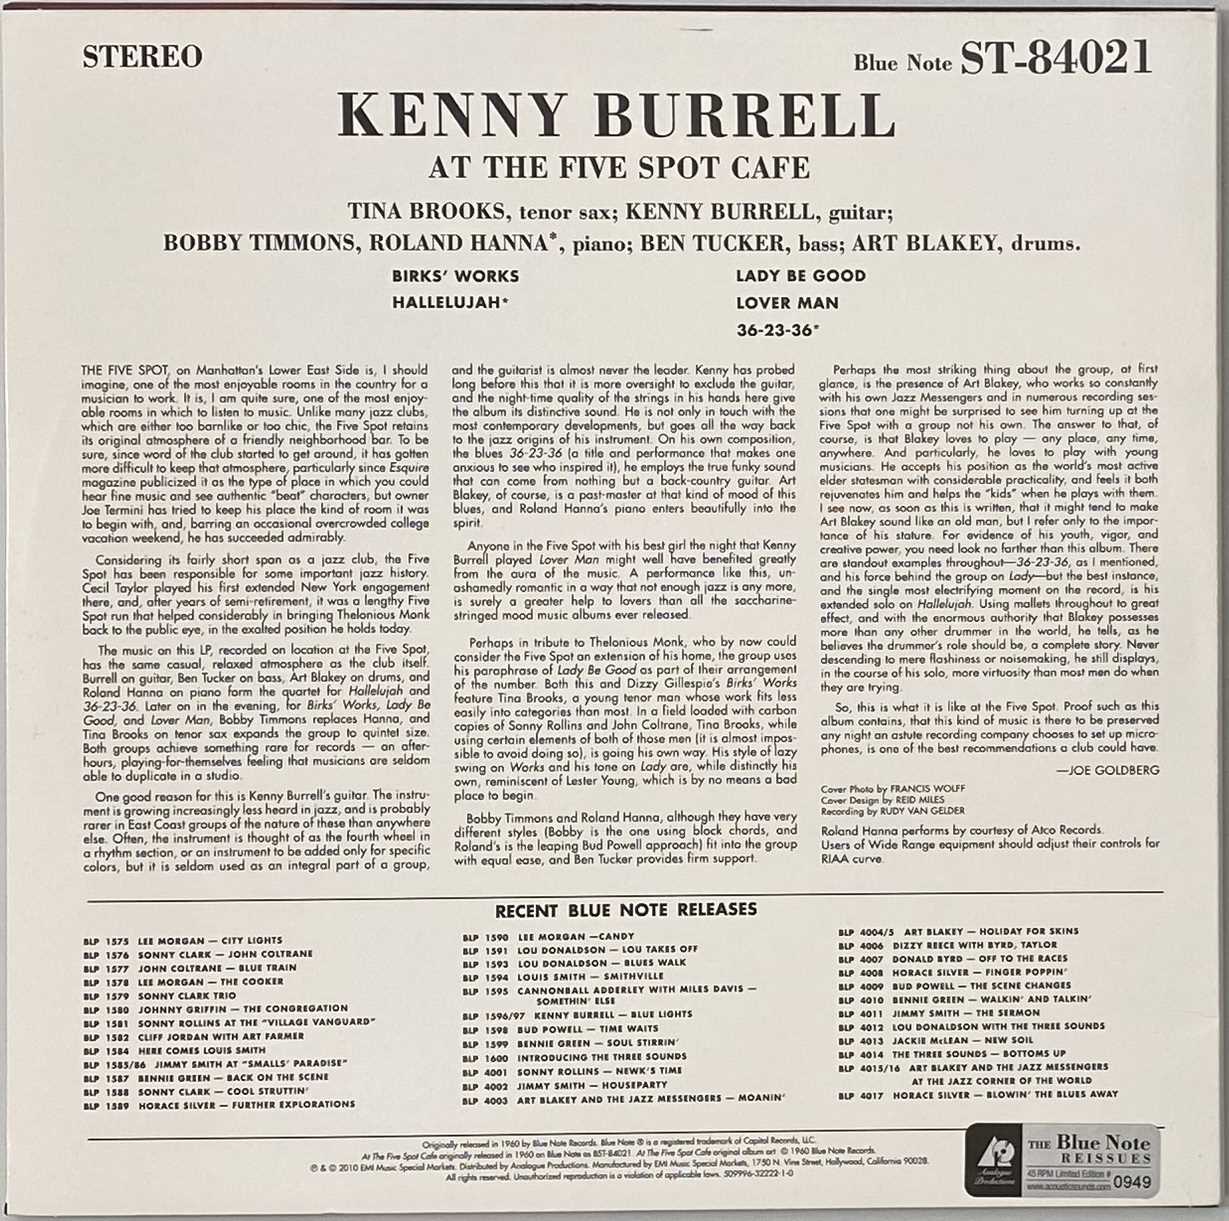 KENNY BURRELL WITH ART BLAKEY - ON VIEW AT THE FIVE SPOT CAFE LP (2010 LTD EDITION PRESSING - 509996 - Image 3 of 8